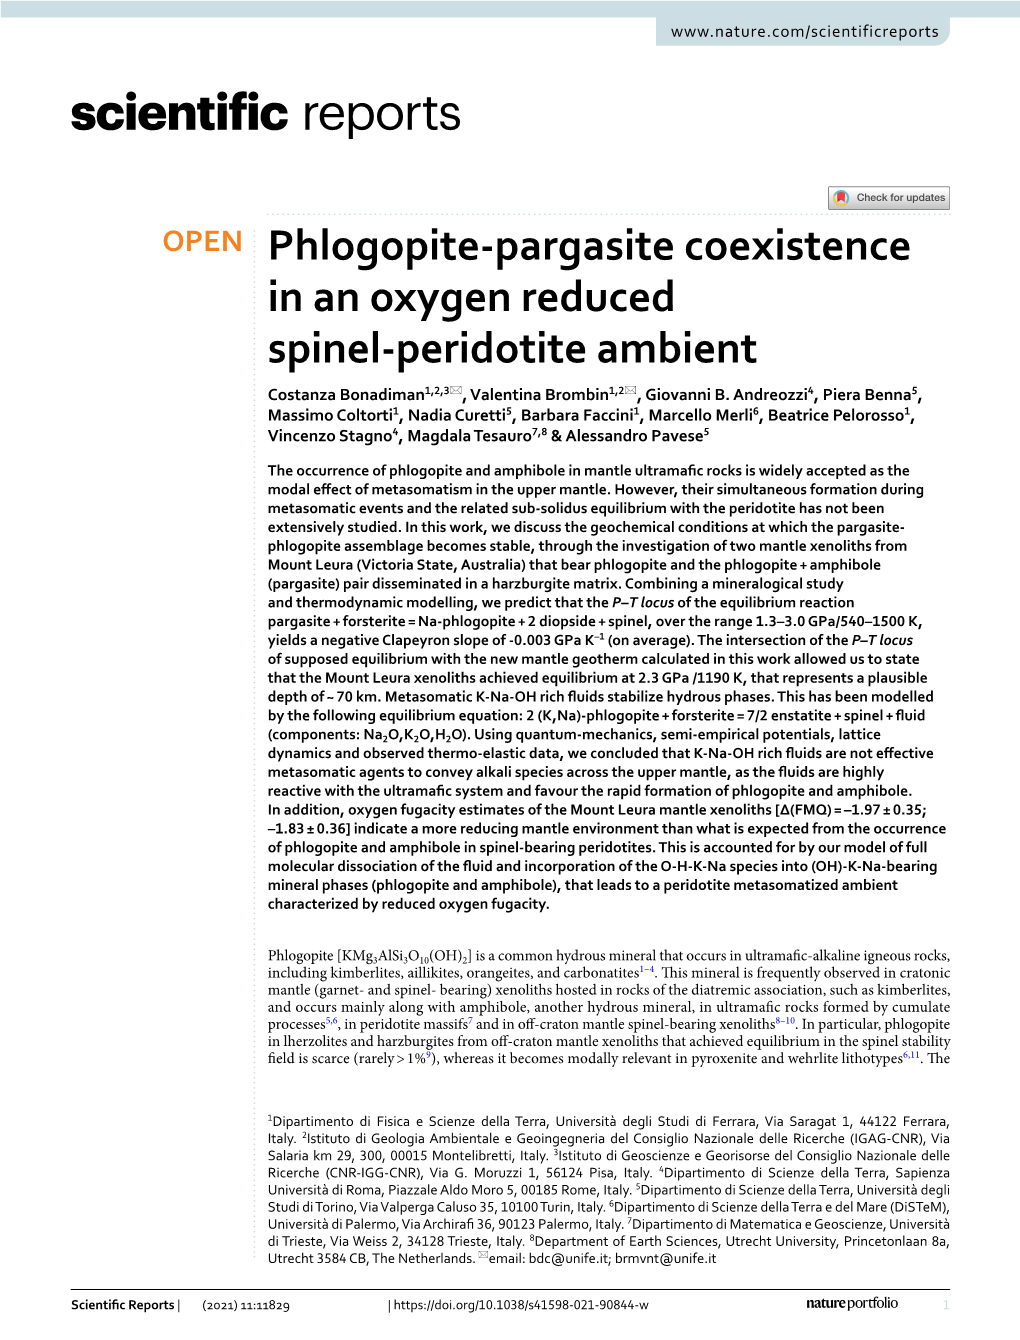 Phlogopite-Pargasite Coexistence in an Oxygen Reduced Spinel